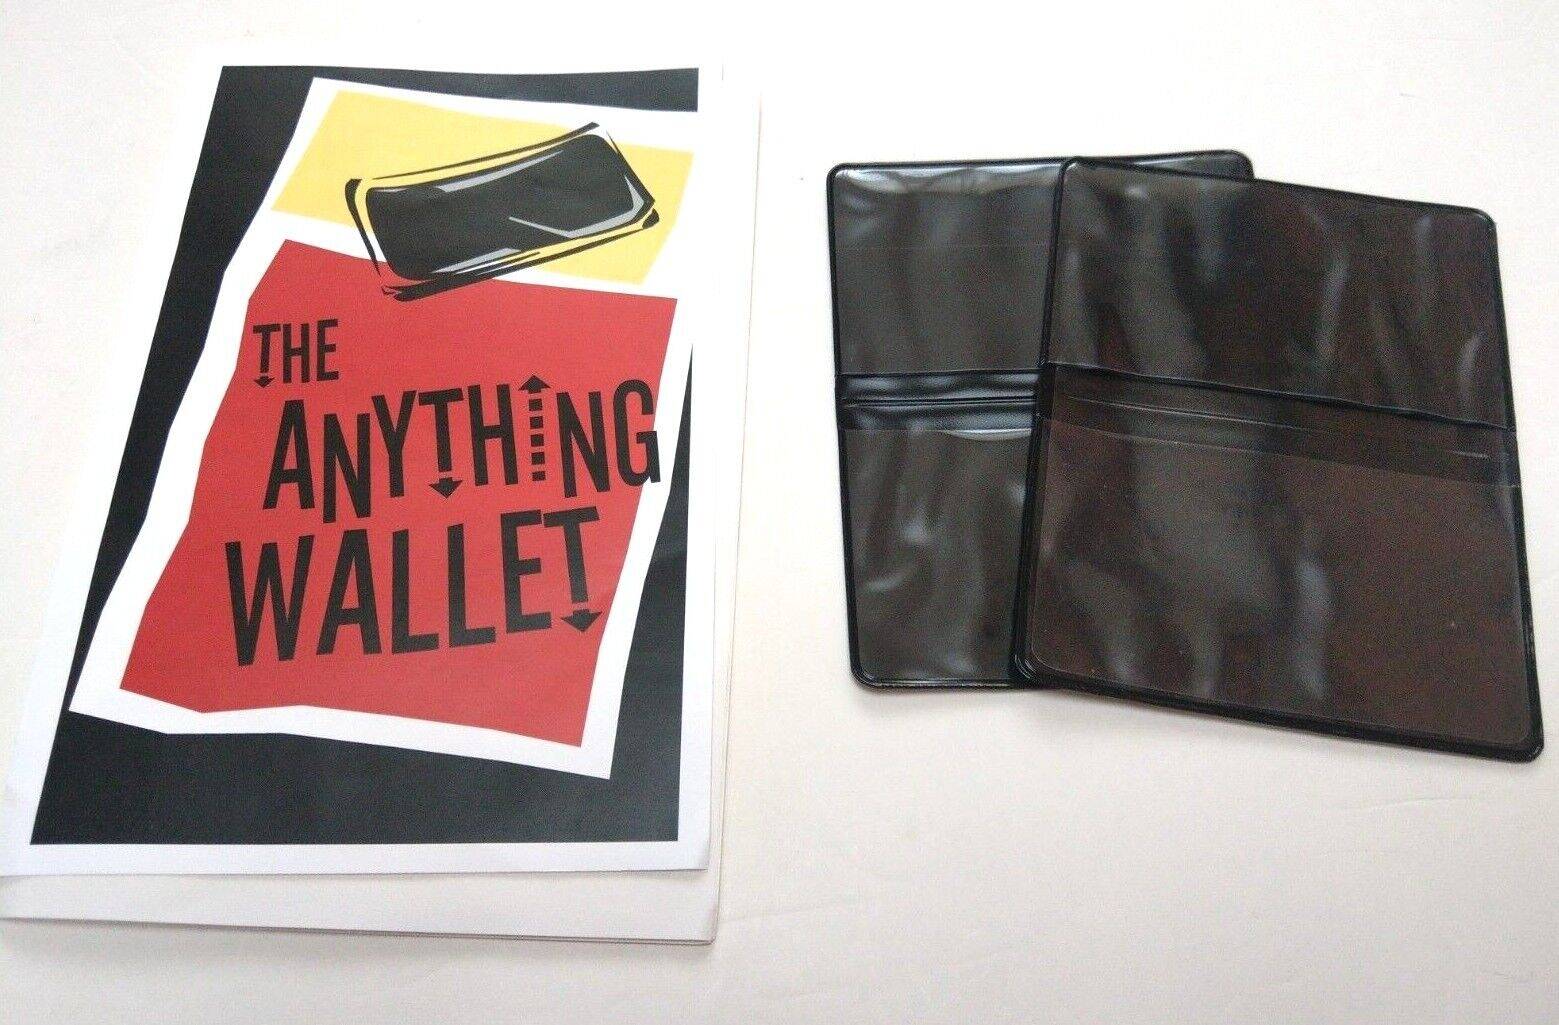 The Anything Wallet by Anthony Miller